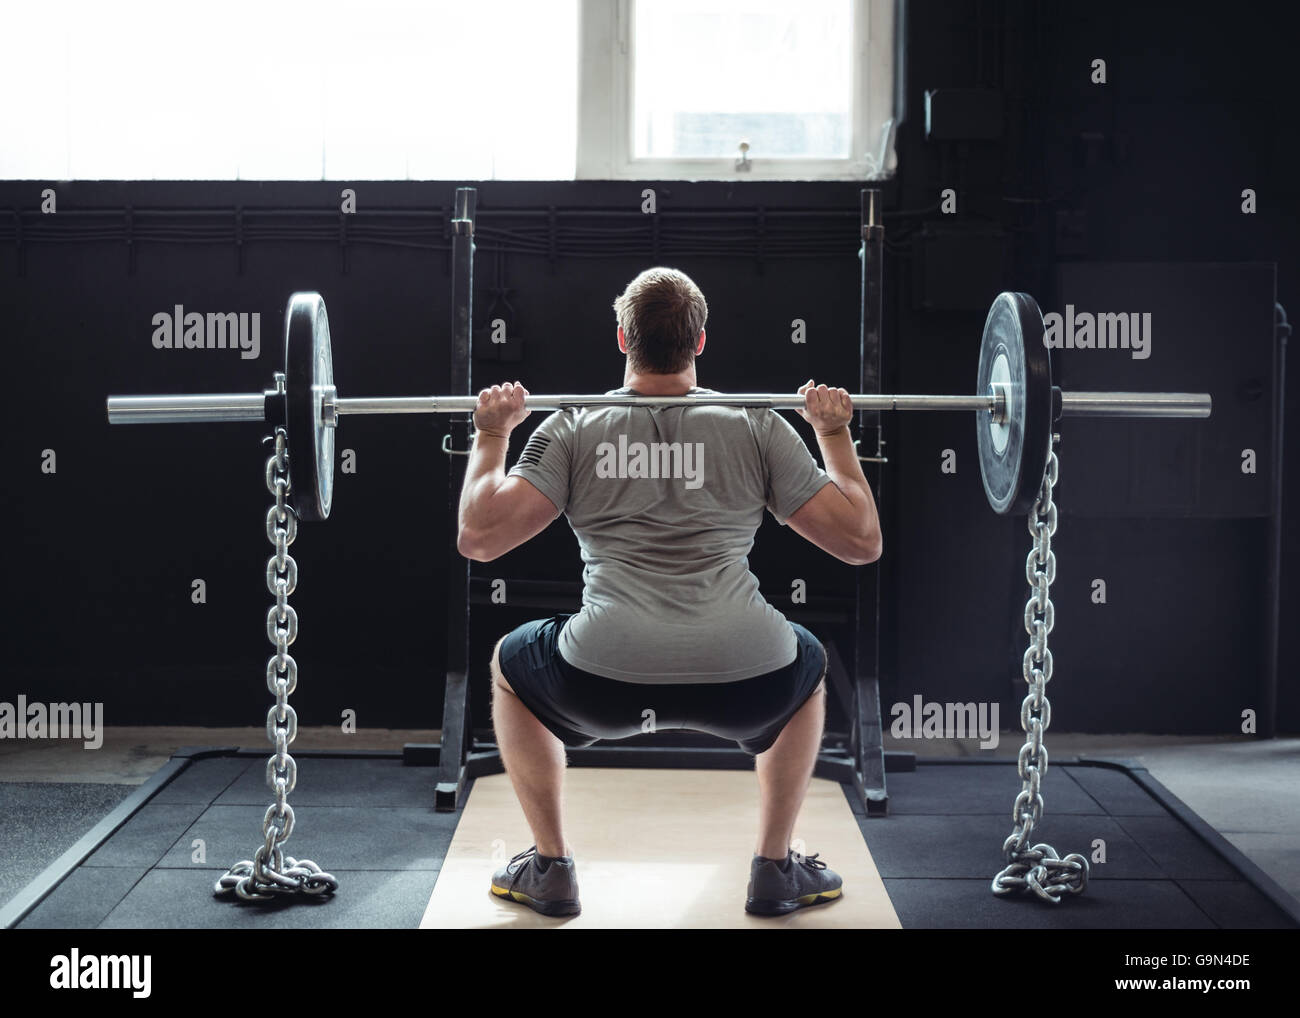 Health and fitness in the gym. Crossfit, weightlifting, equipment. Stock Photo